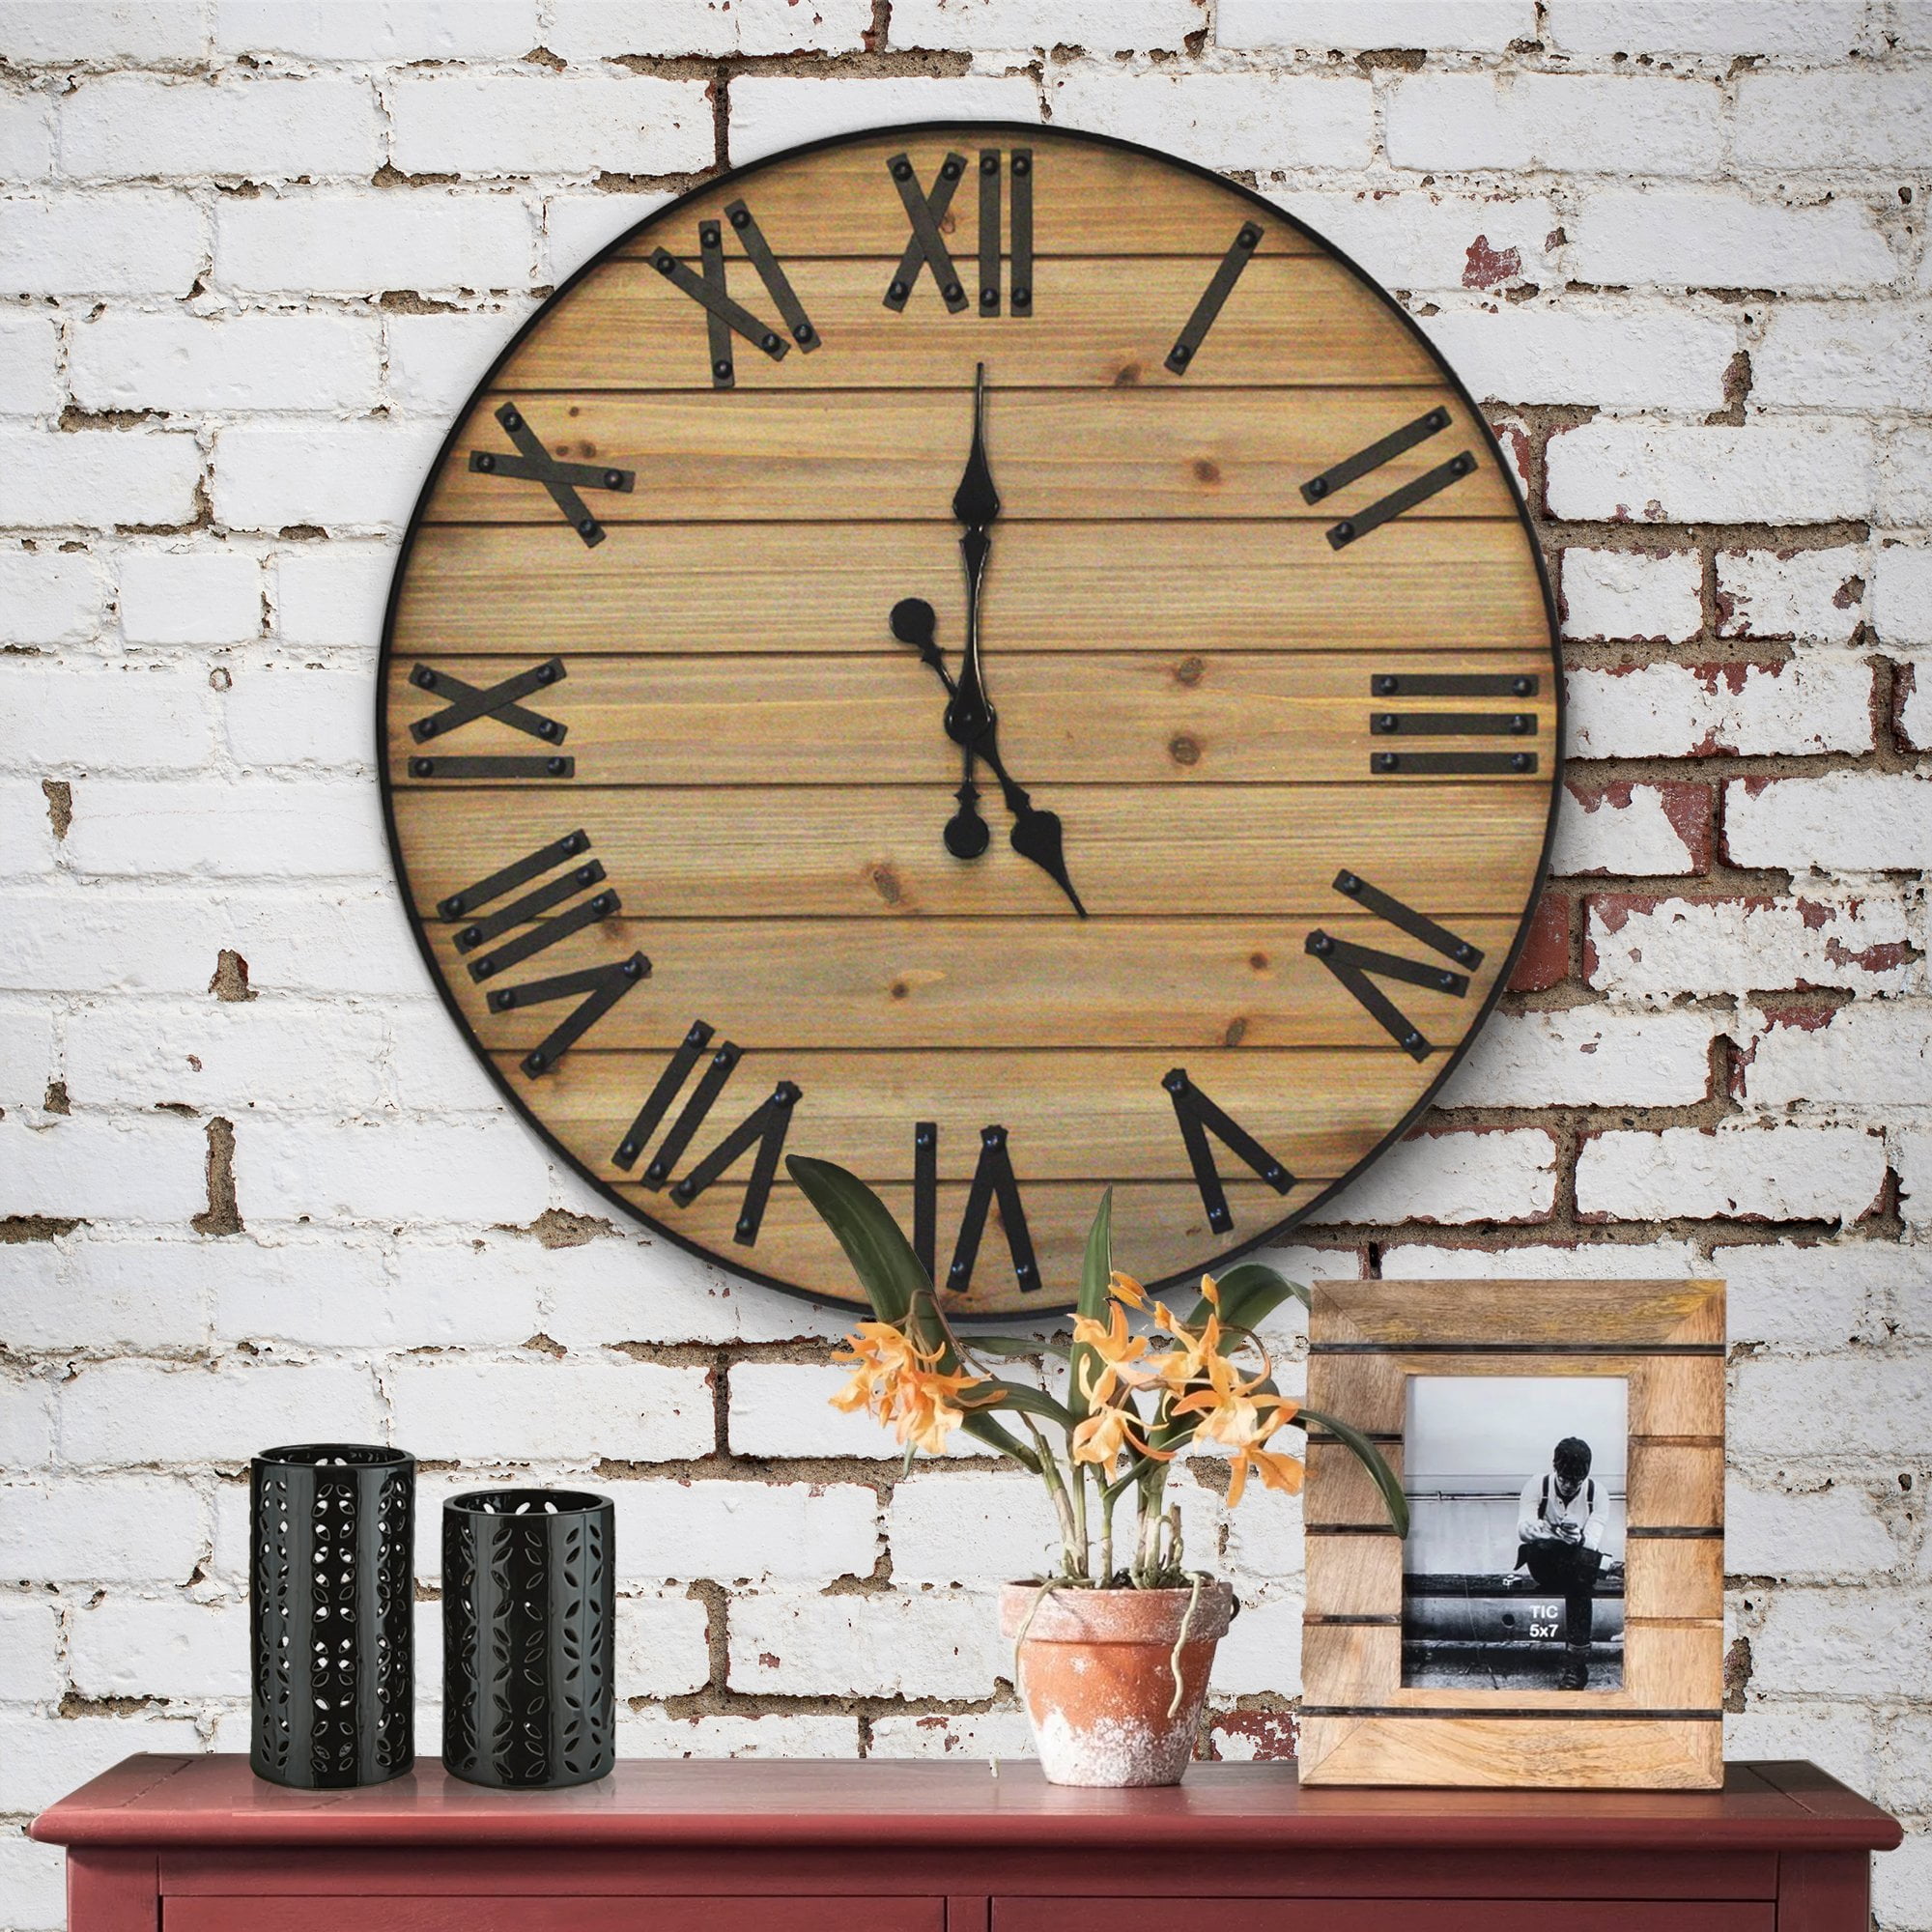 Arizona Teal Rustic Look Clock Large Vintage Round Wooden Clock Silent Non Ticking Printed Decal Image Battery Operated Clock Rustic Clock Farmhouse Clock Home Decor Living Room 12 Inch